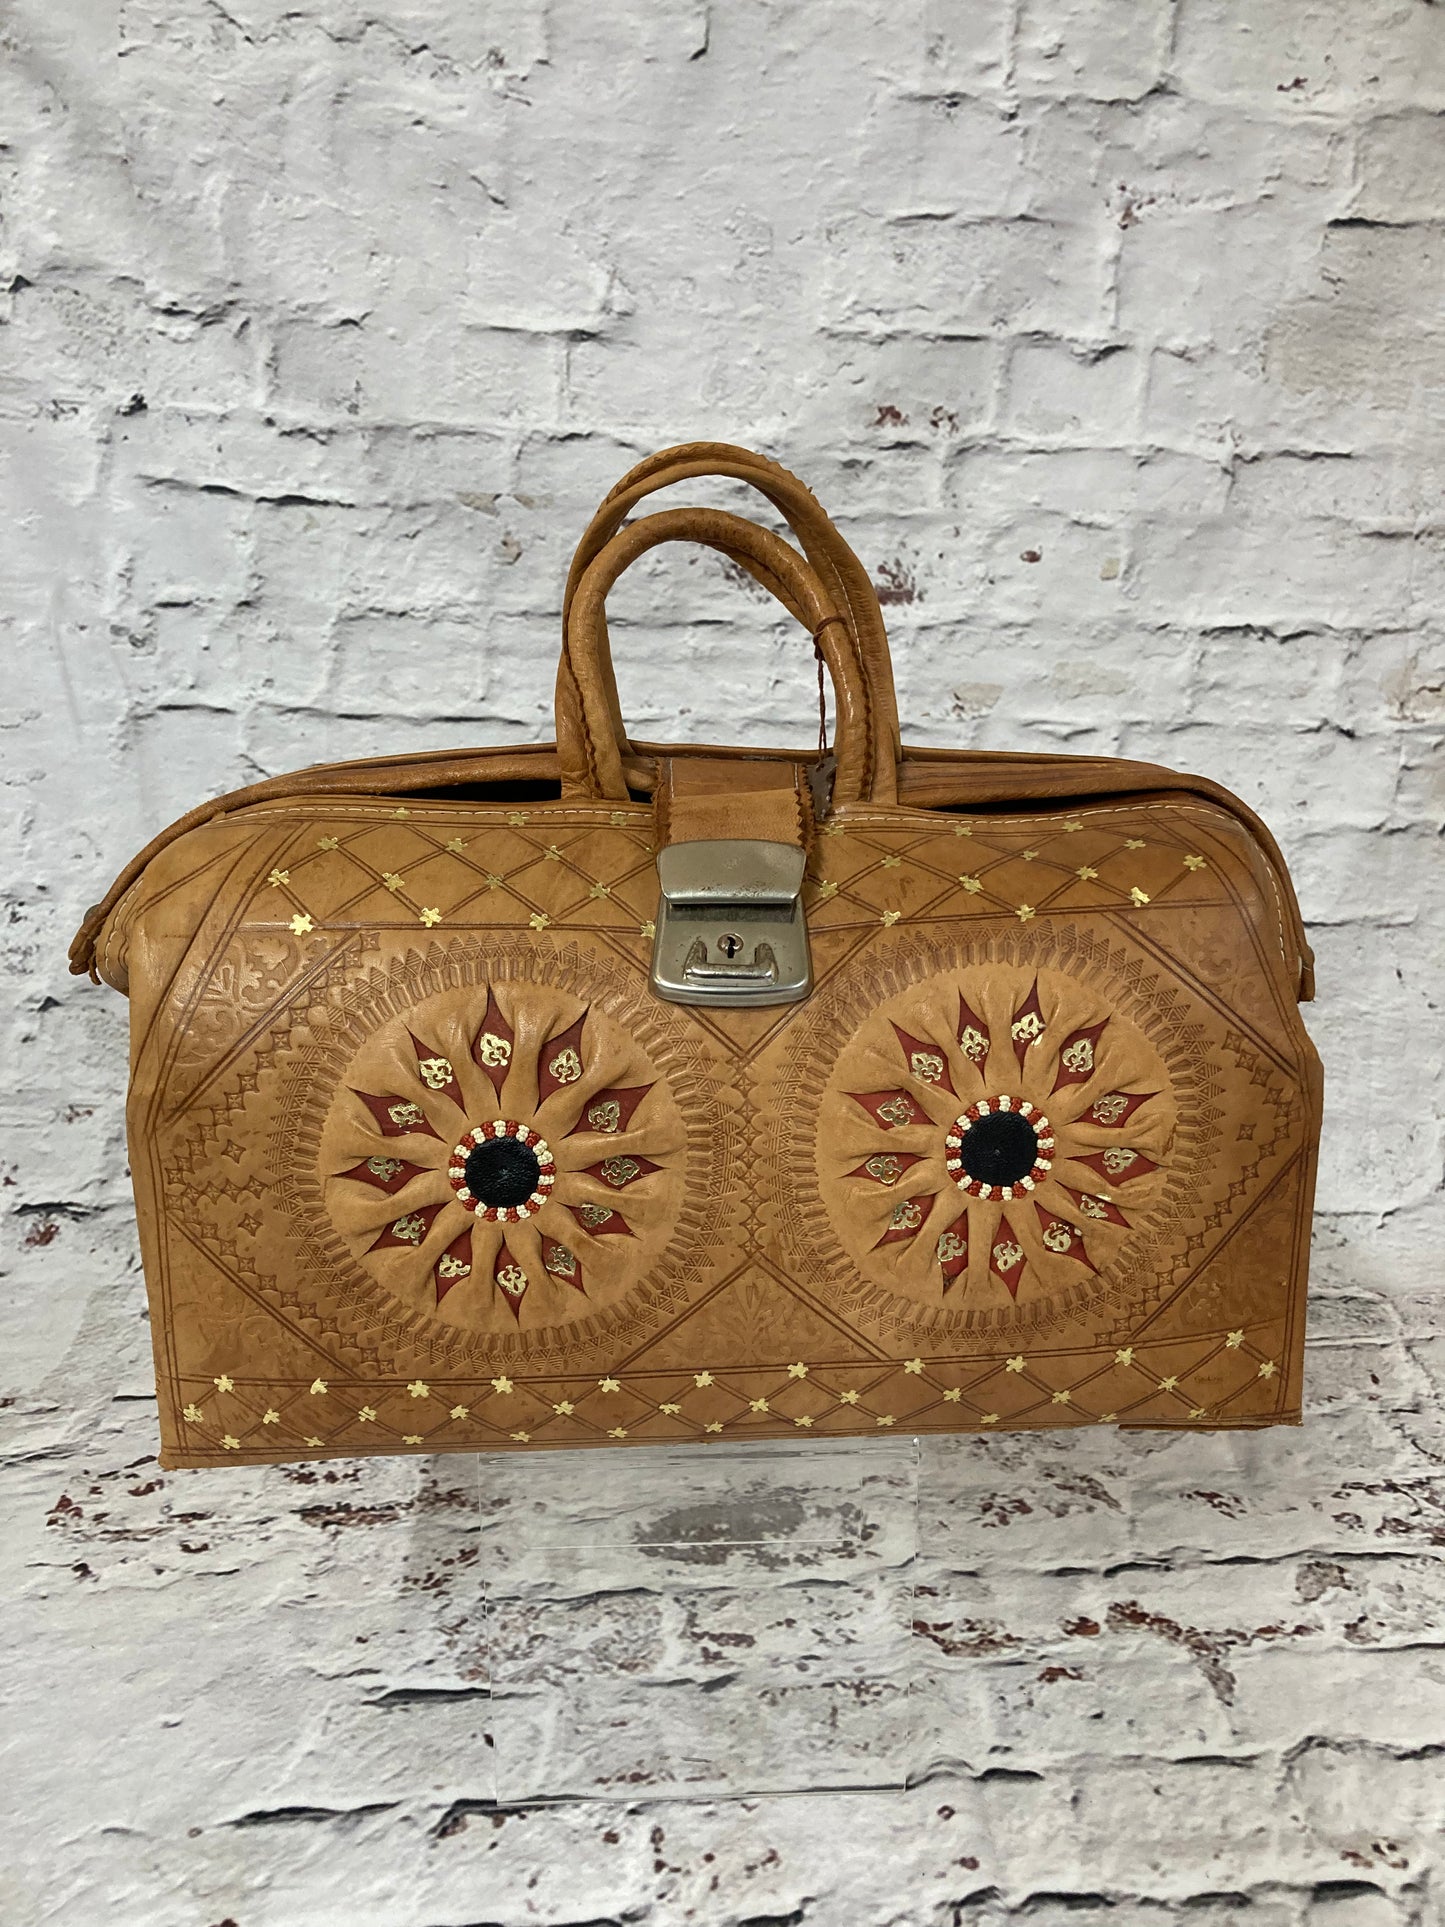 North African Light Tan With Gold and Red Embellishment Doctors Bag with Lock